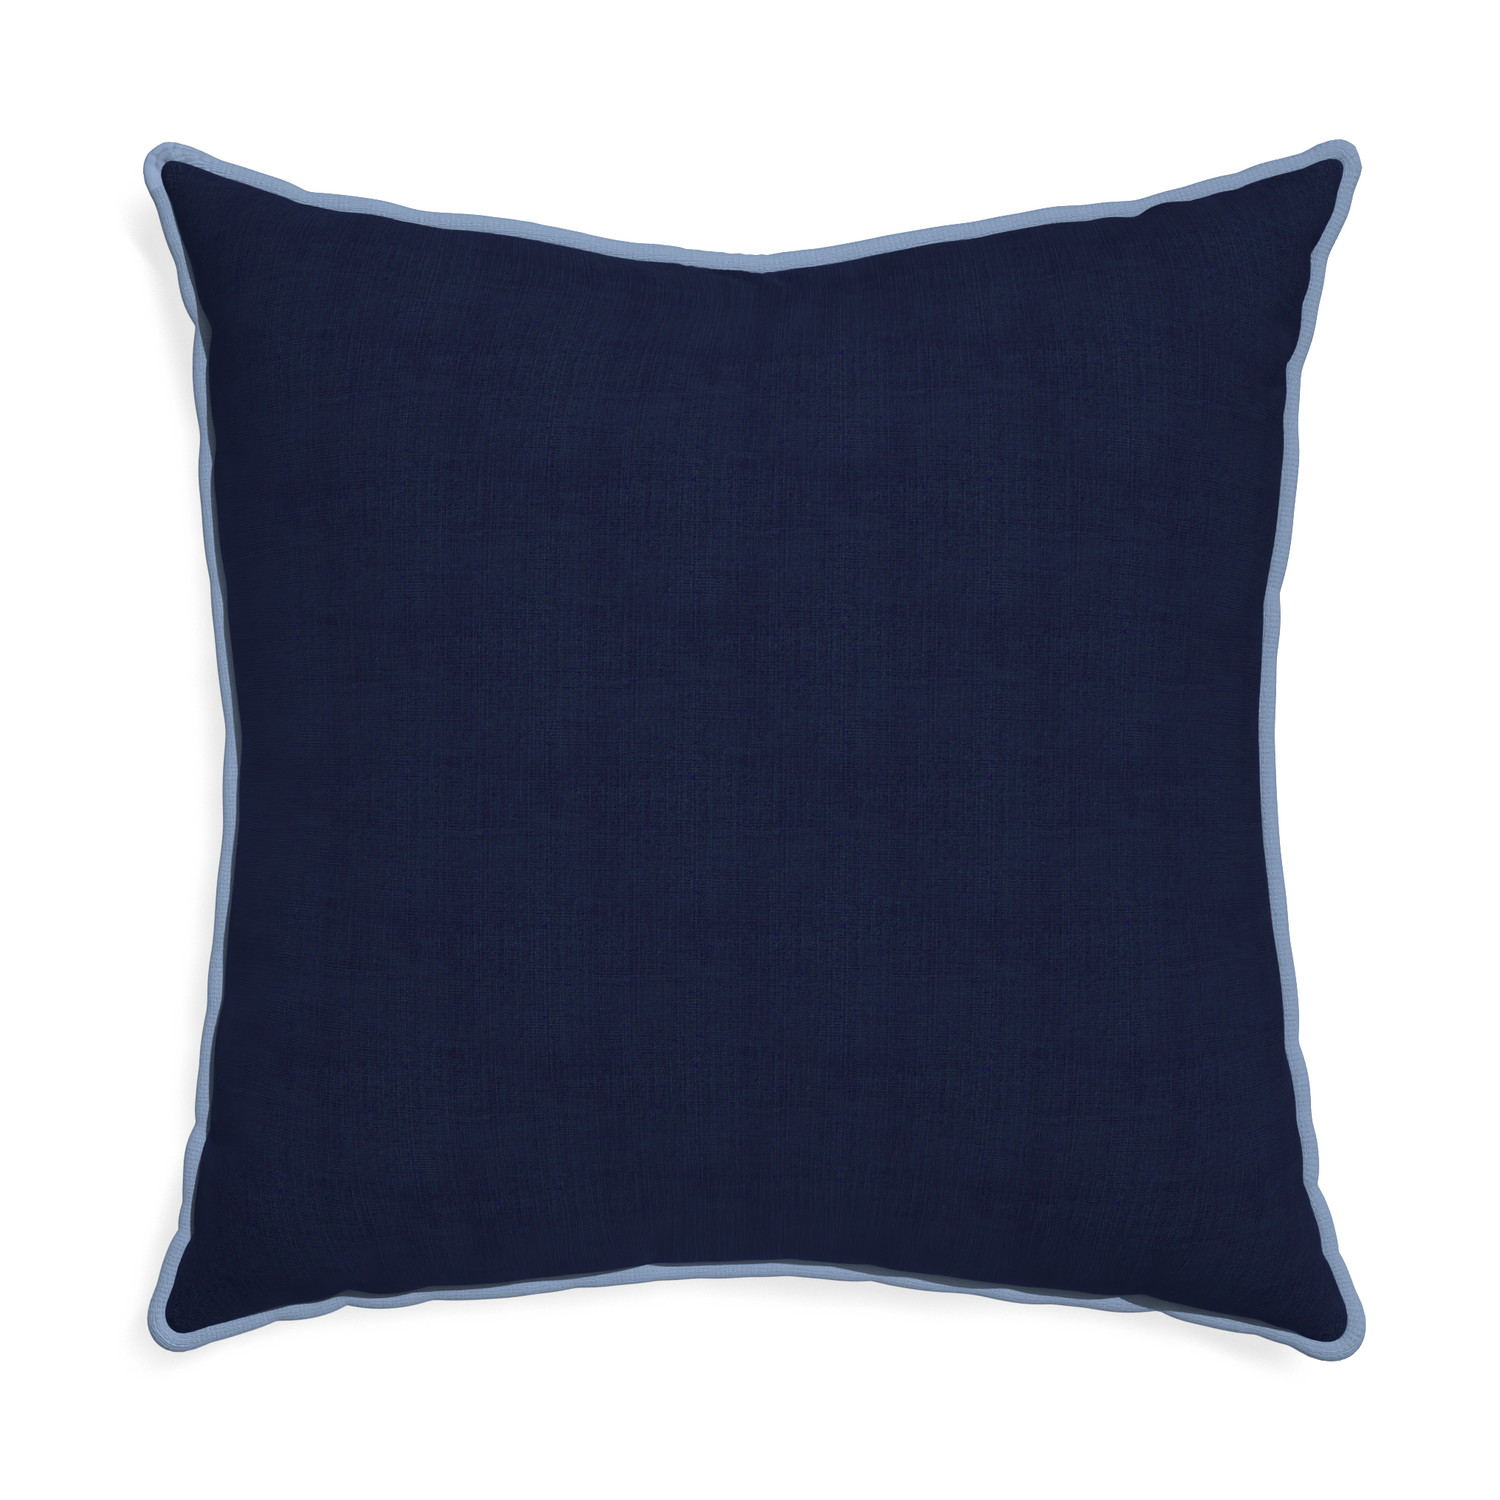 Euro-sham midnight custom pillow with sky piping on white background